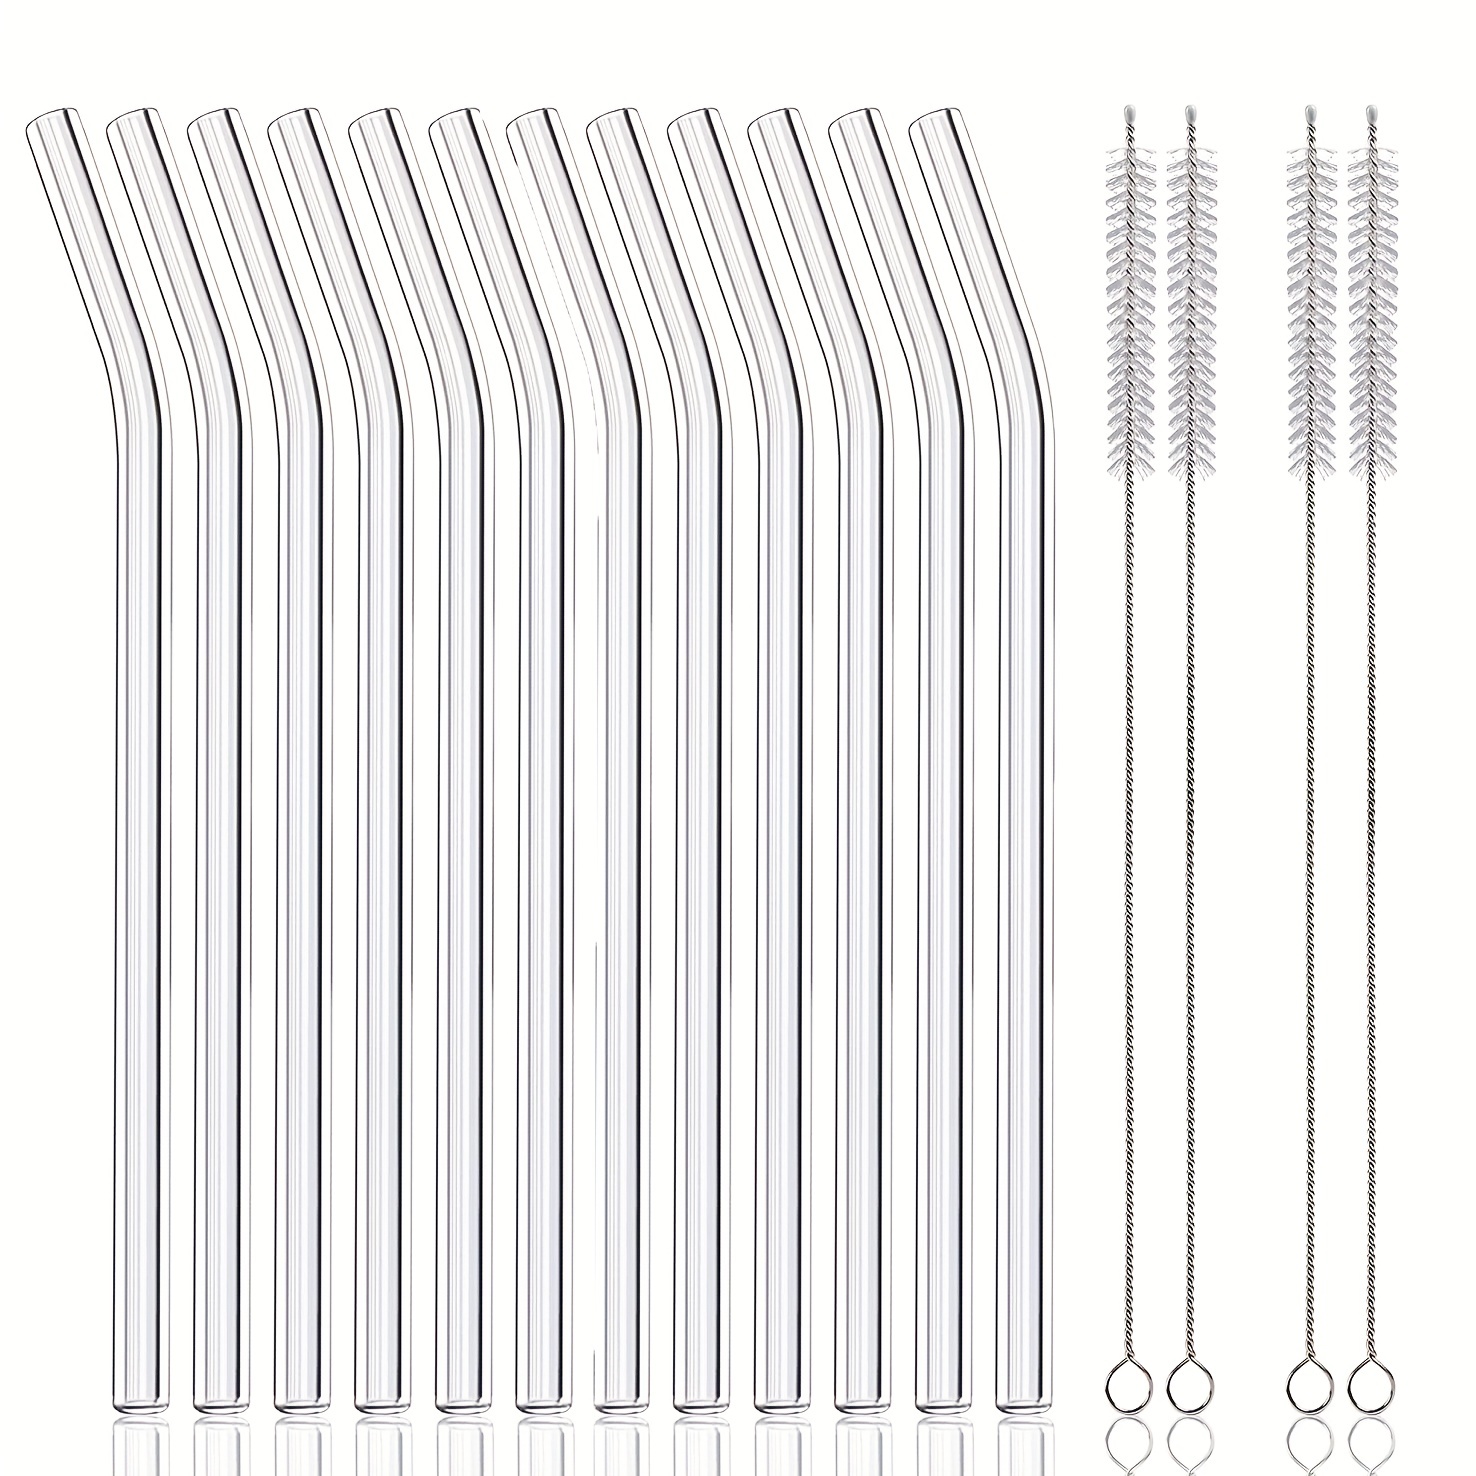 Glass Straws, Reusable Glass Drinking Straws, Long, Including 6 Straight  And 6 Bent With 4 Cleaning Brush, Clear Glass Straws Reusable - Temu